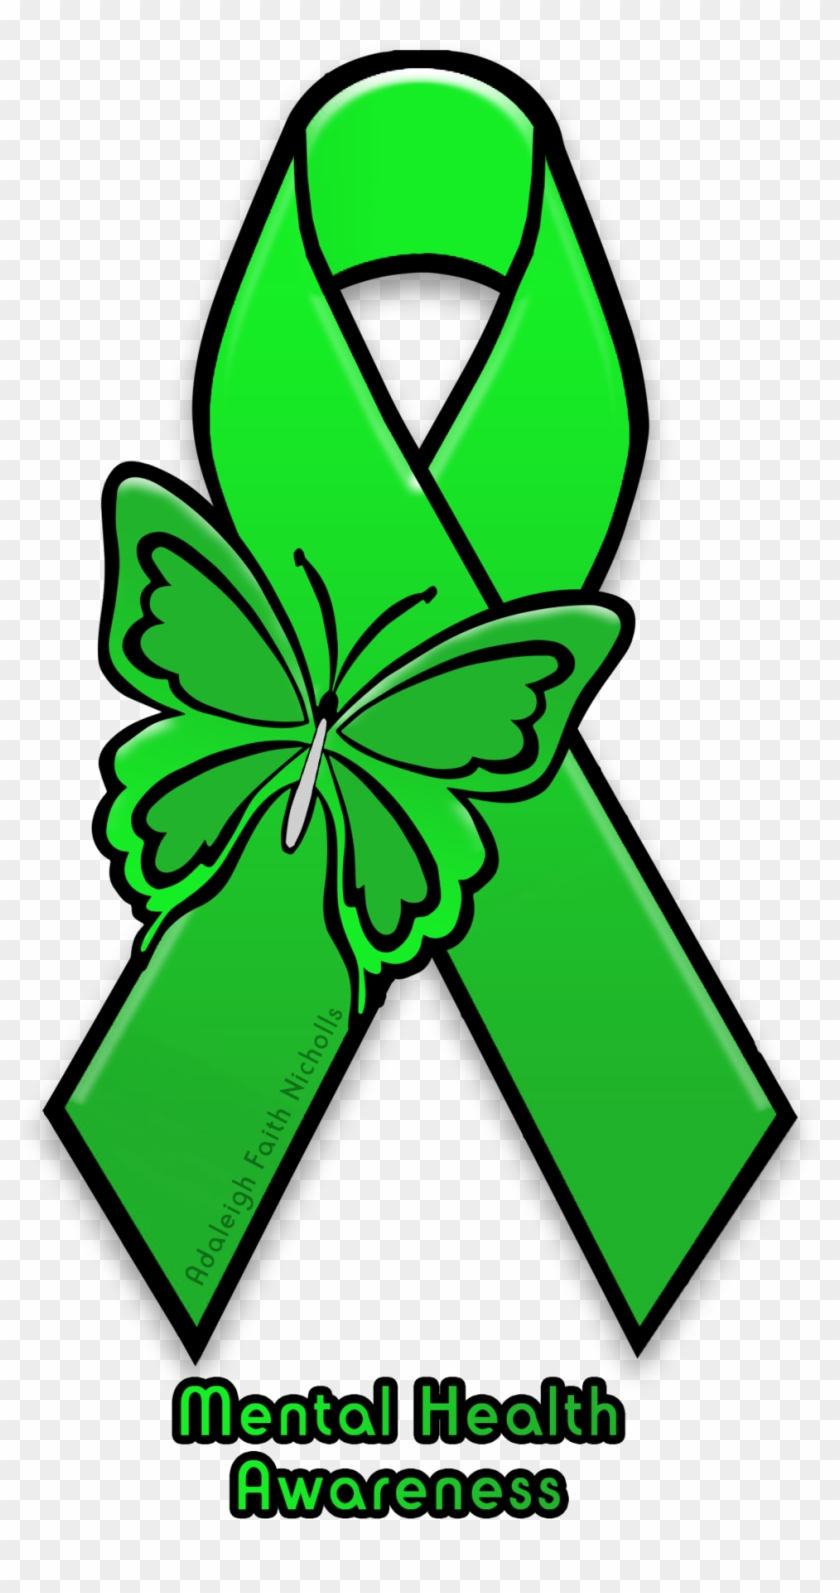 Mental Health/illness Awareness By Adaleighfaith - Cerebral Palsy Awareness Ribbon #188402